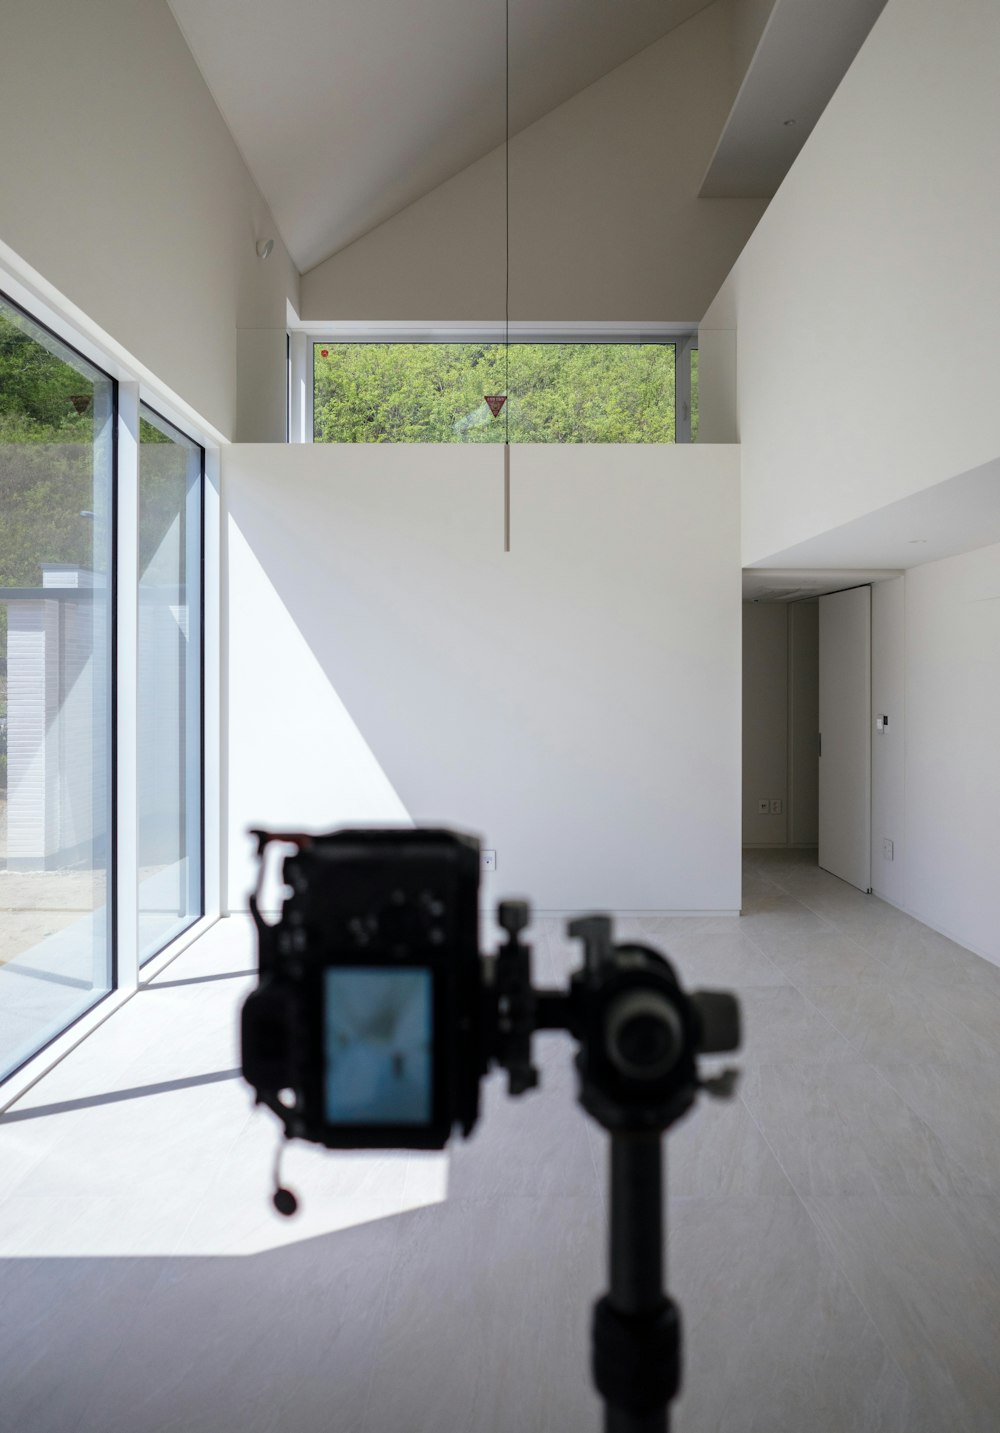 a camera is on a tripod in a room